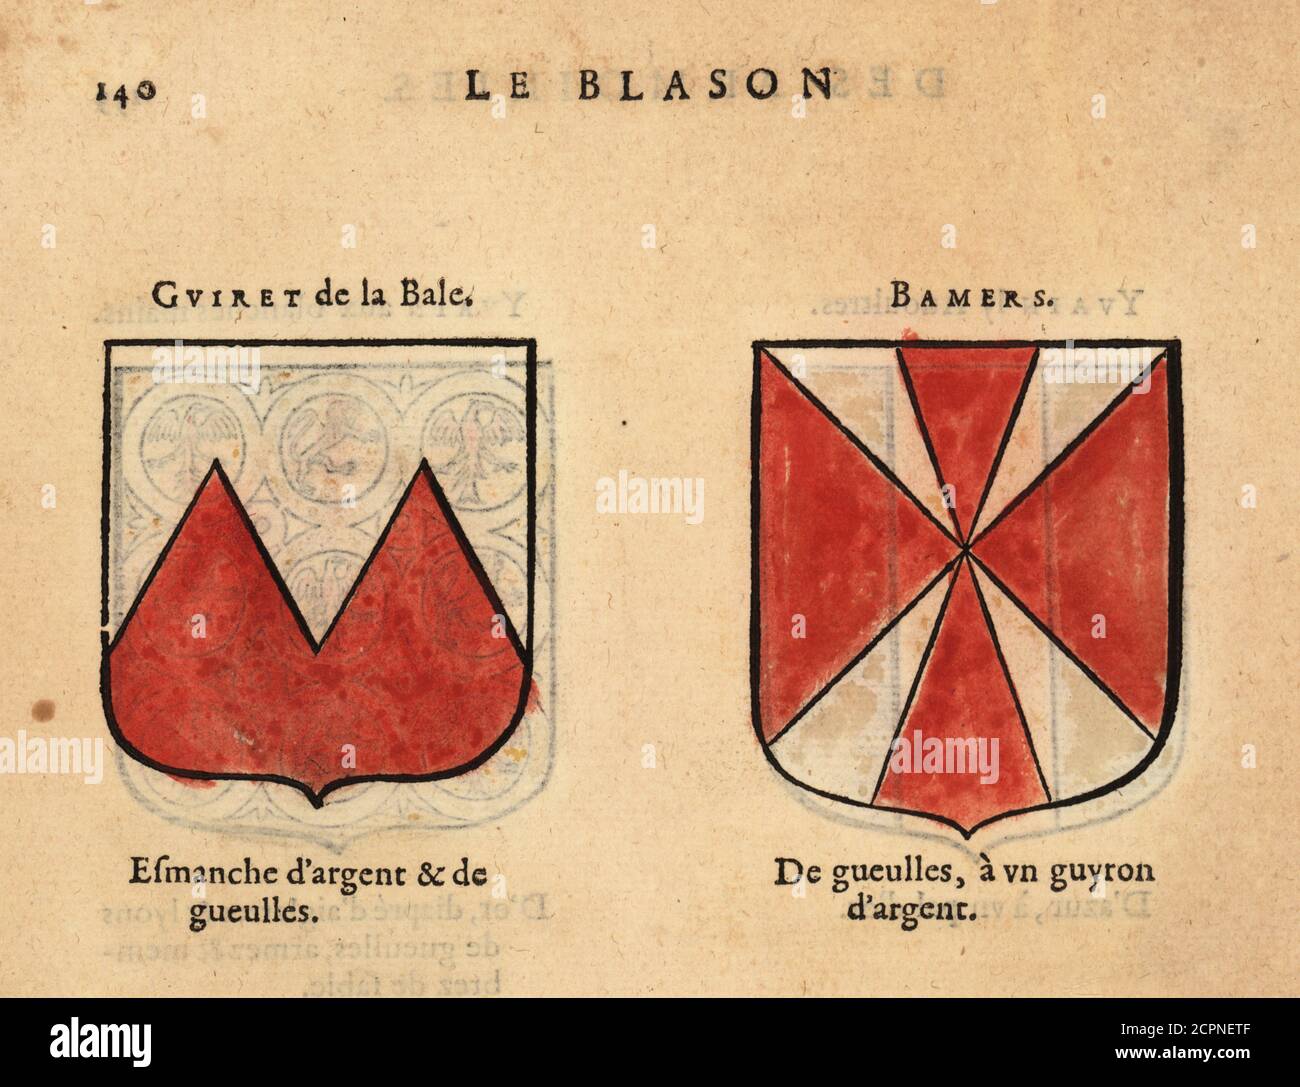 Imaginary coats of arms of King Arthur’s Knights of the Round Table: Guivret the Small with silver and red and Banyer., Chevaliers de la table ronde: Guiret de la Bale, Bamers. Handcoloured woodblock engraving from Hierosme de Bara’s Le Blason des Armoiries, Chez Rolet Boutonne, Paris, 1628 Stock Photo